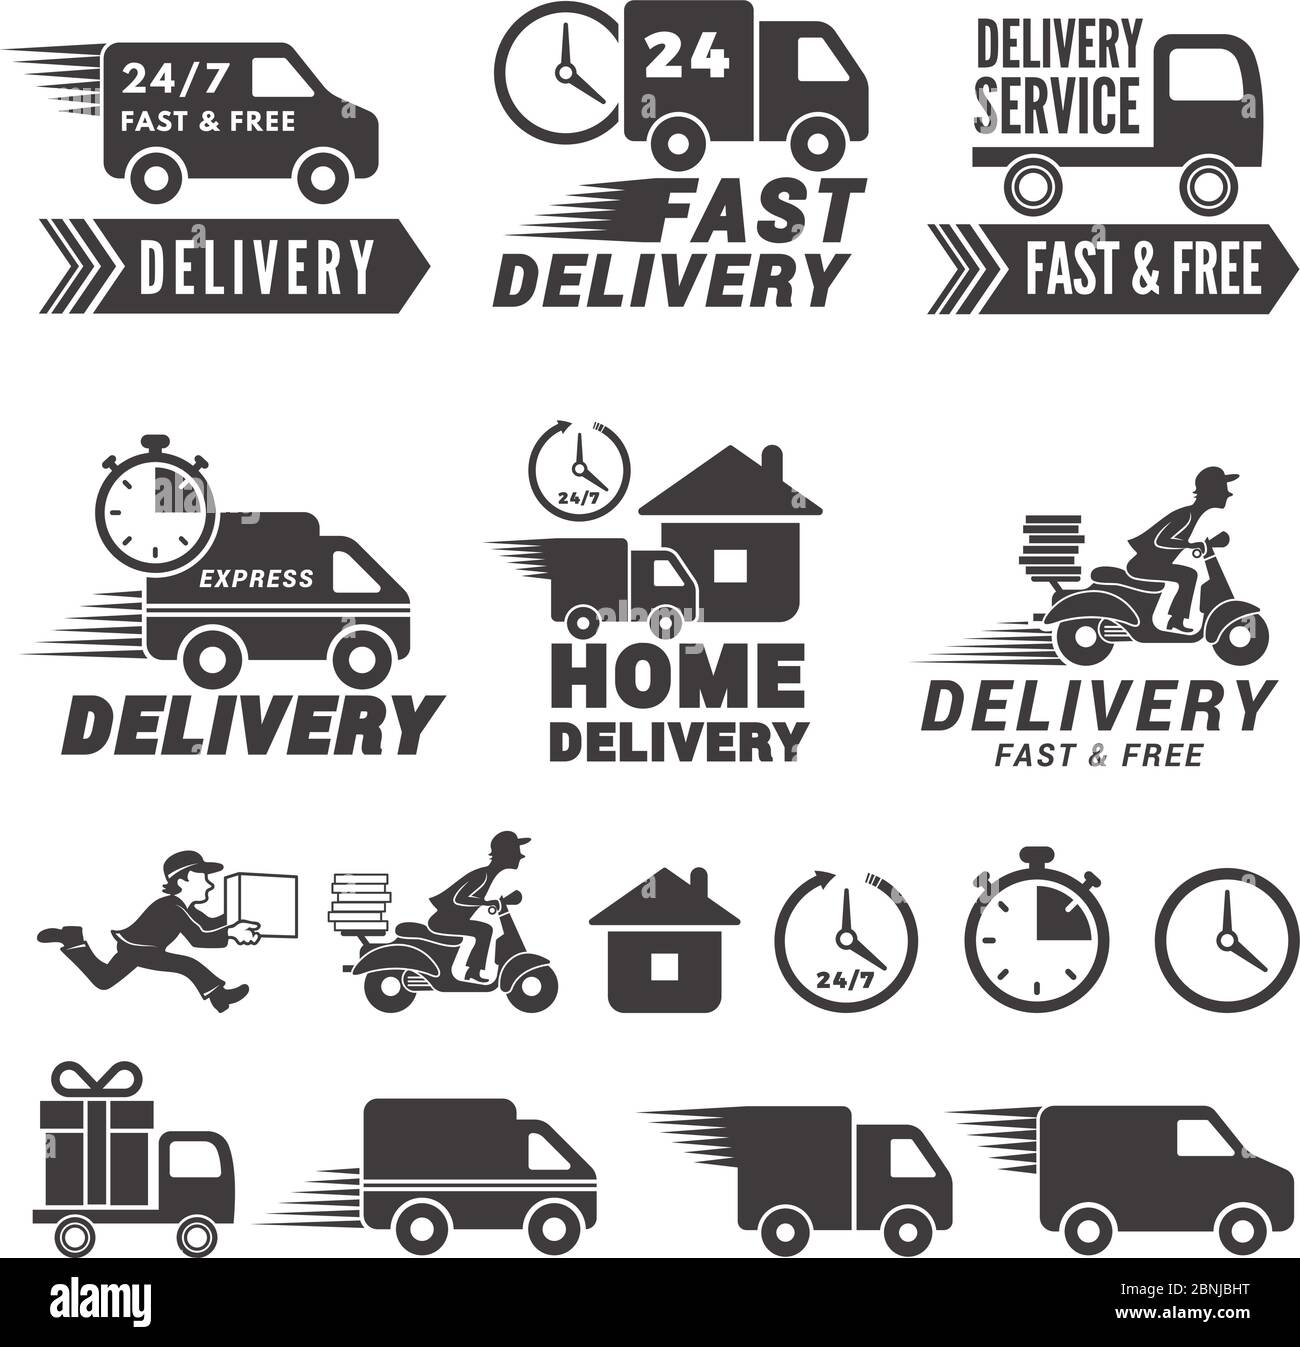 Overnight delivery hi-res stock photography and images - Alamy